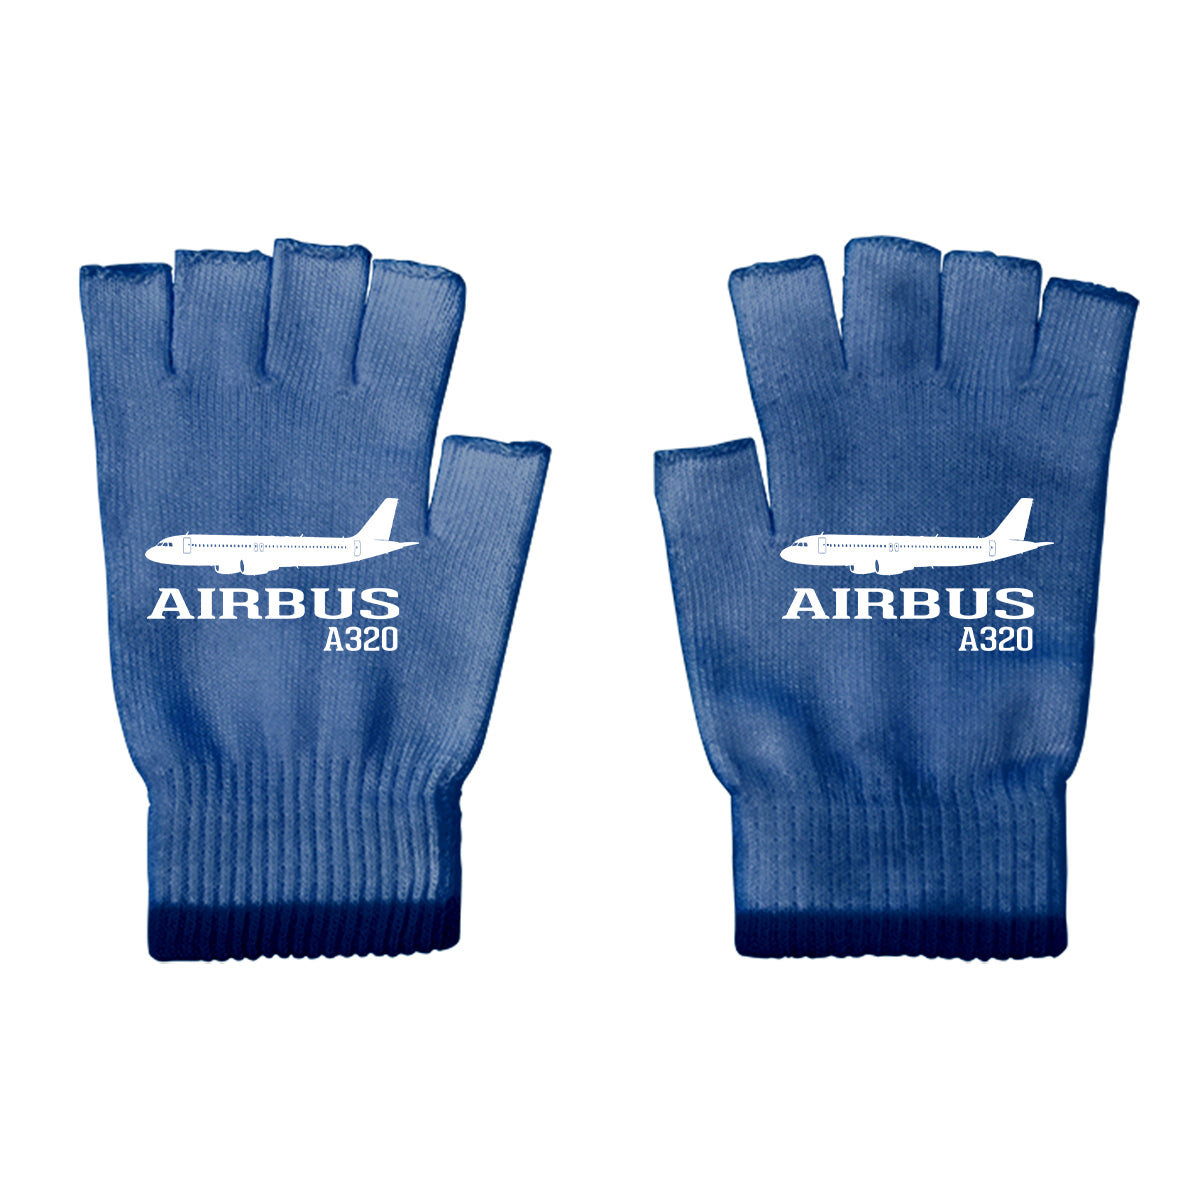 Airbus A320 Printed Designed Cut Gloves